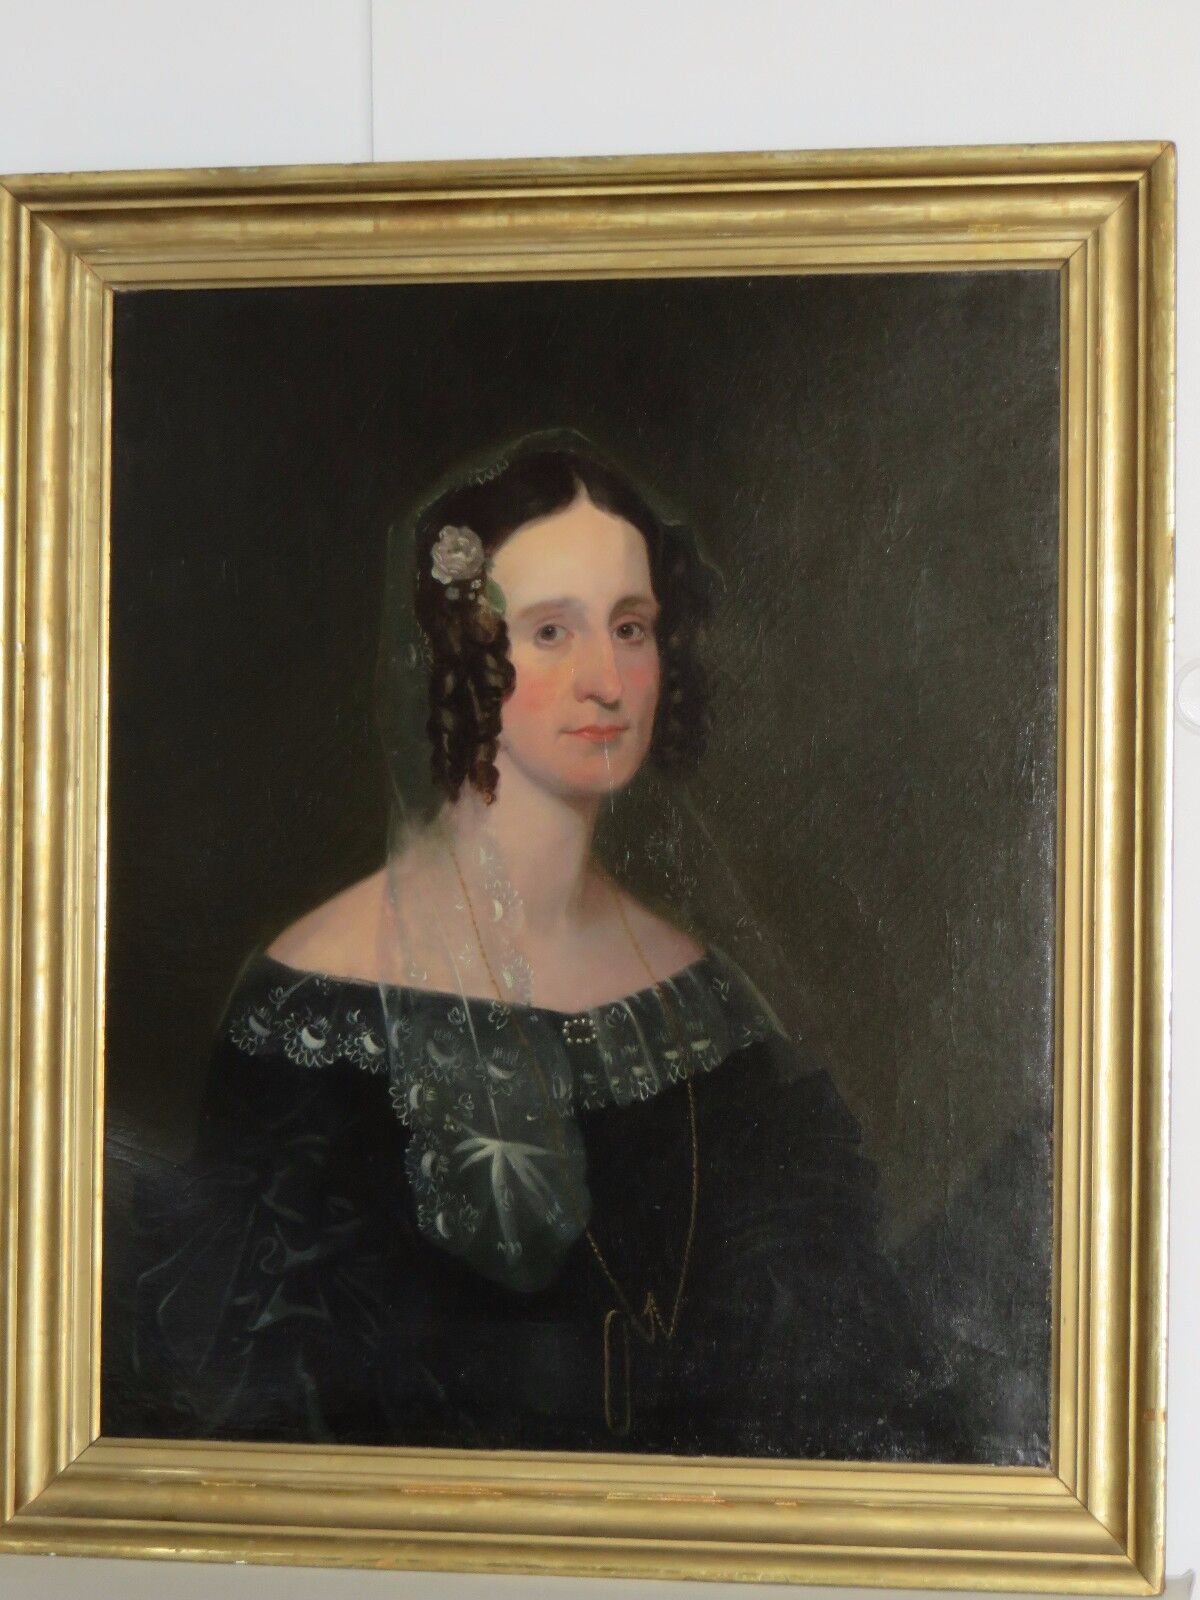 Antique Painting of A Woman,Oil on Canvas,Very Large, Late 18th - Early 19th C.